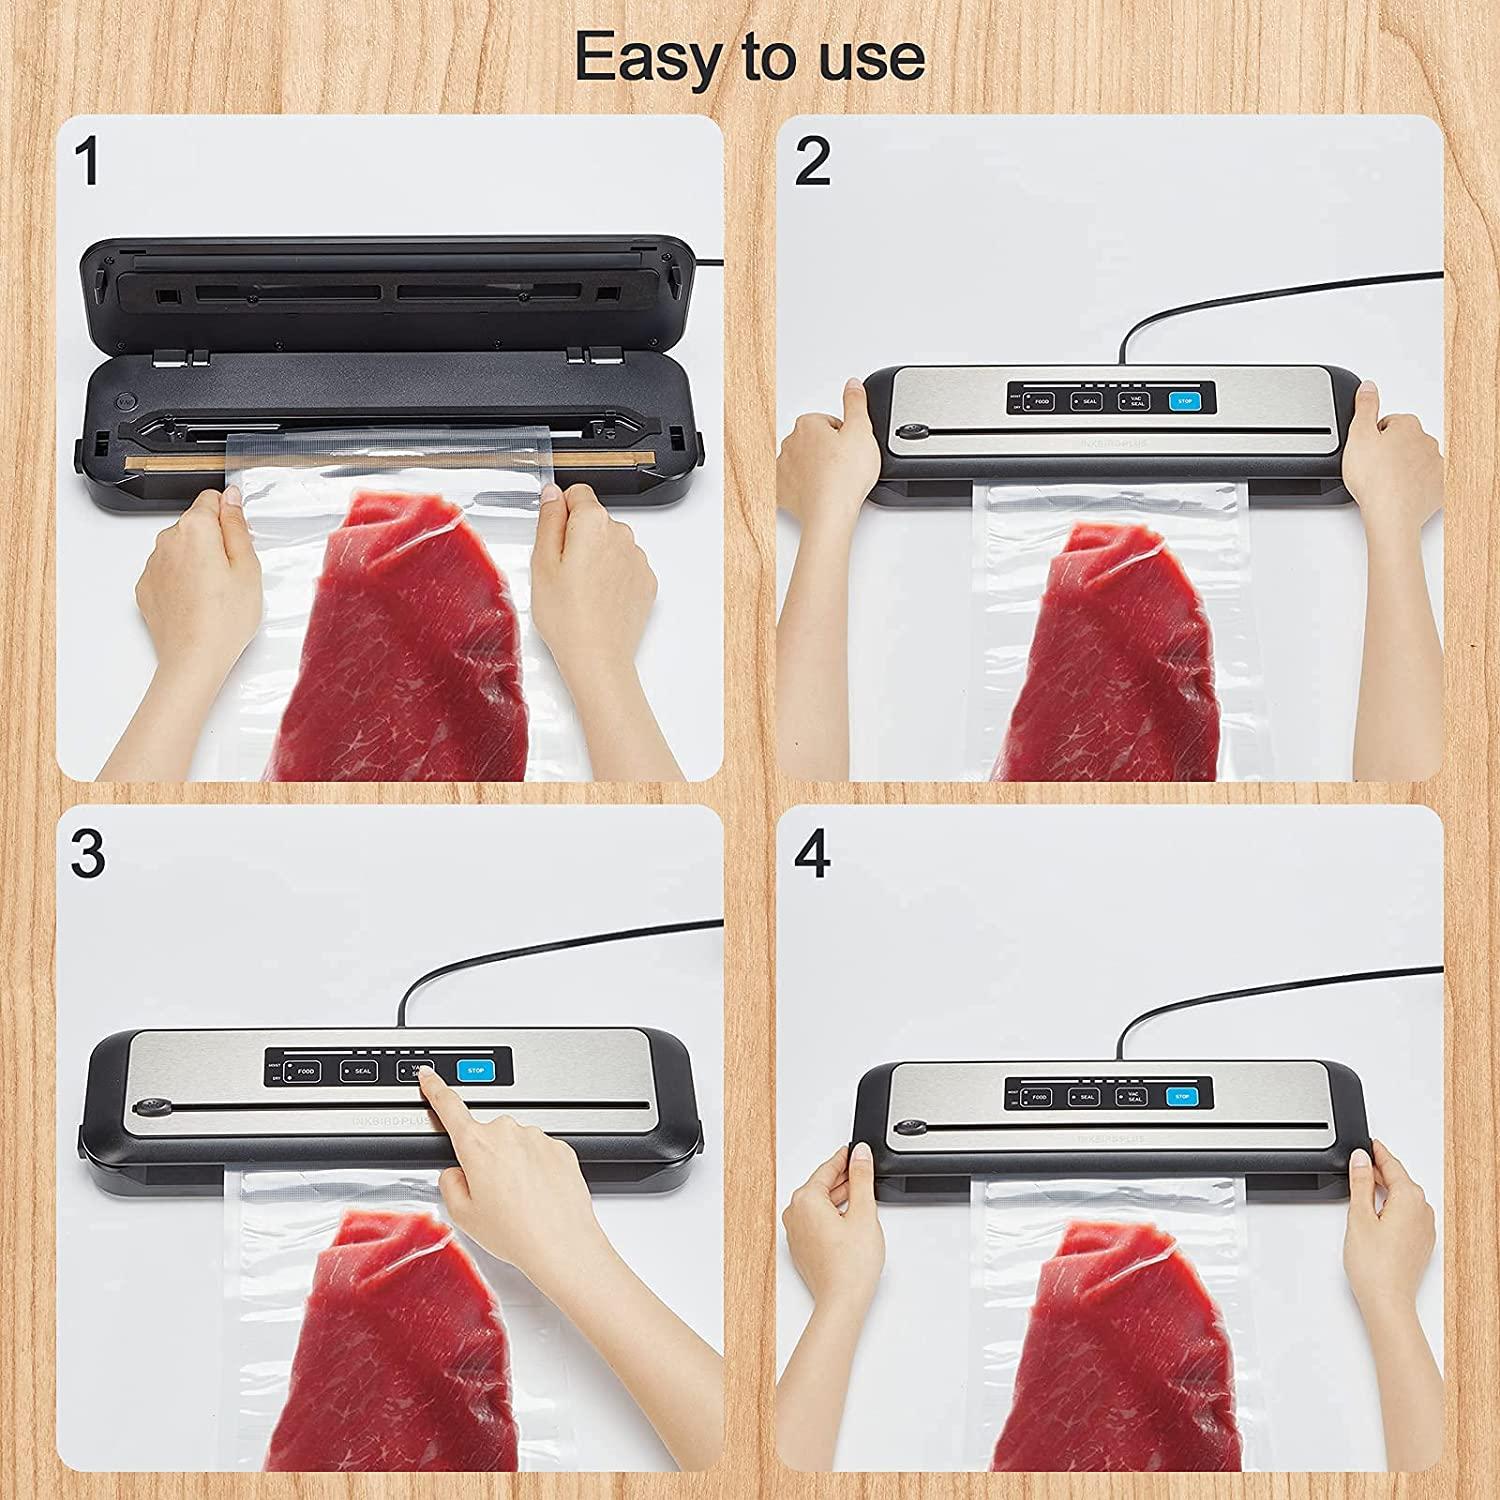 Inkbird Vacuum Sealer Machine with Starter Kit, Automatic PowerVac Air Sealing  Machine for Food Preservation, Dry & Moist Sealing Modes,Built-in  Cutter,Easy Cleaning Storage with Sealer Bag*5 (8*11.8)and Bag Roll*1  (8*7